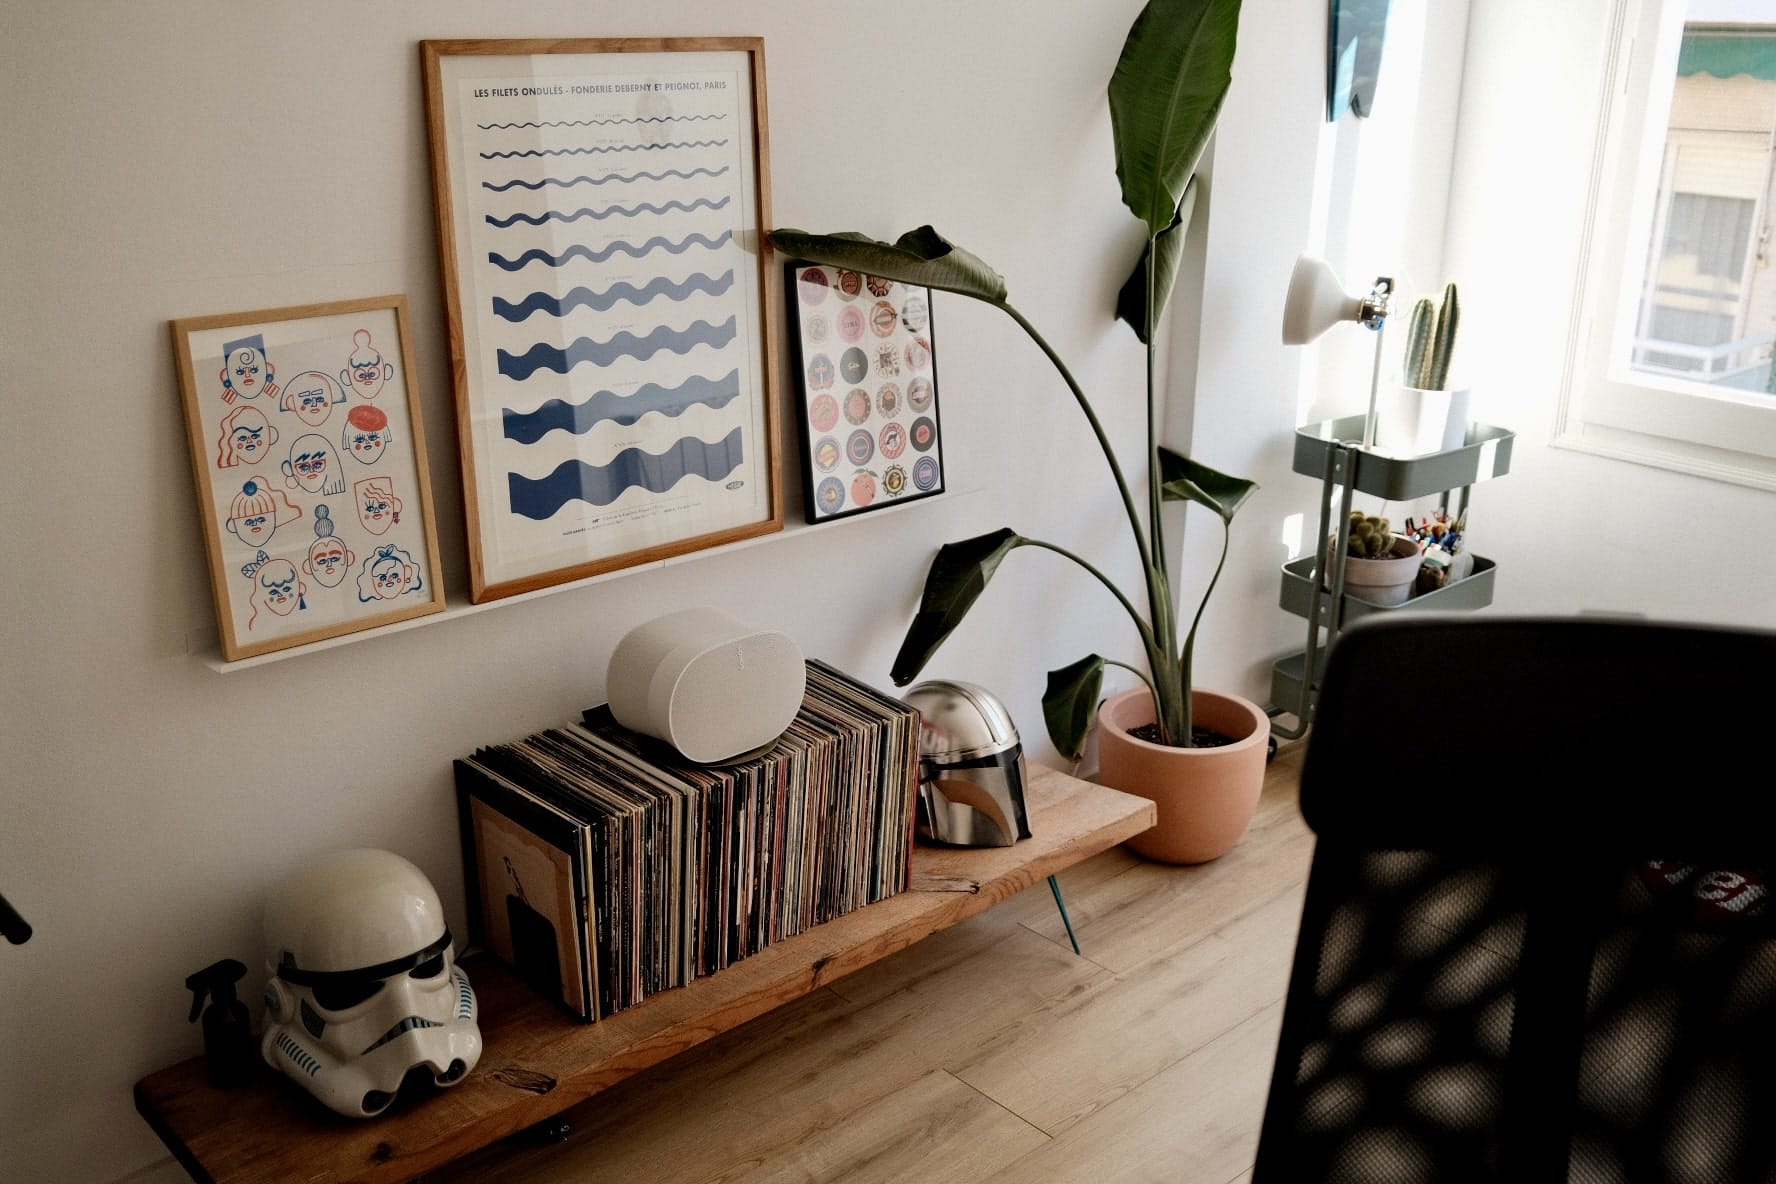 A room corner with a vinyl record collection on a wooden shelf, framed graphic prints on the wall, a plant in a pot, and a speaker